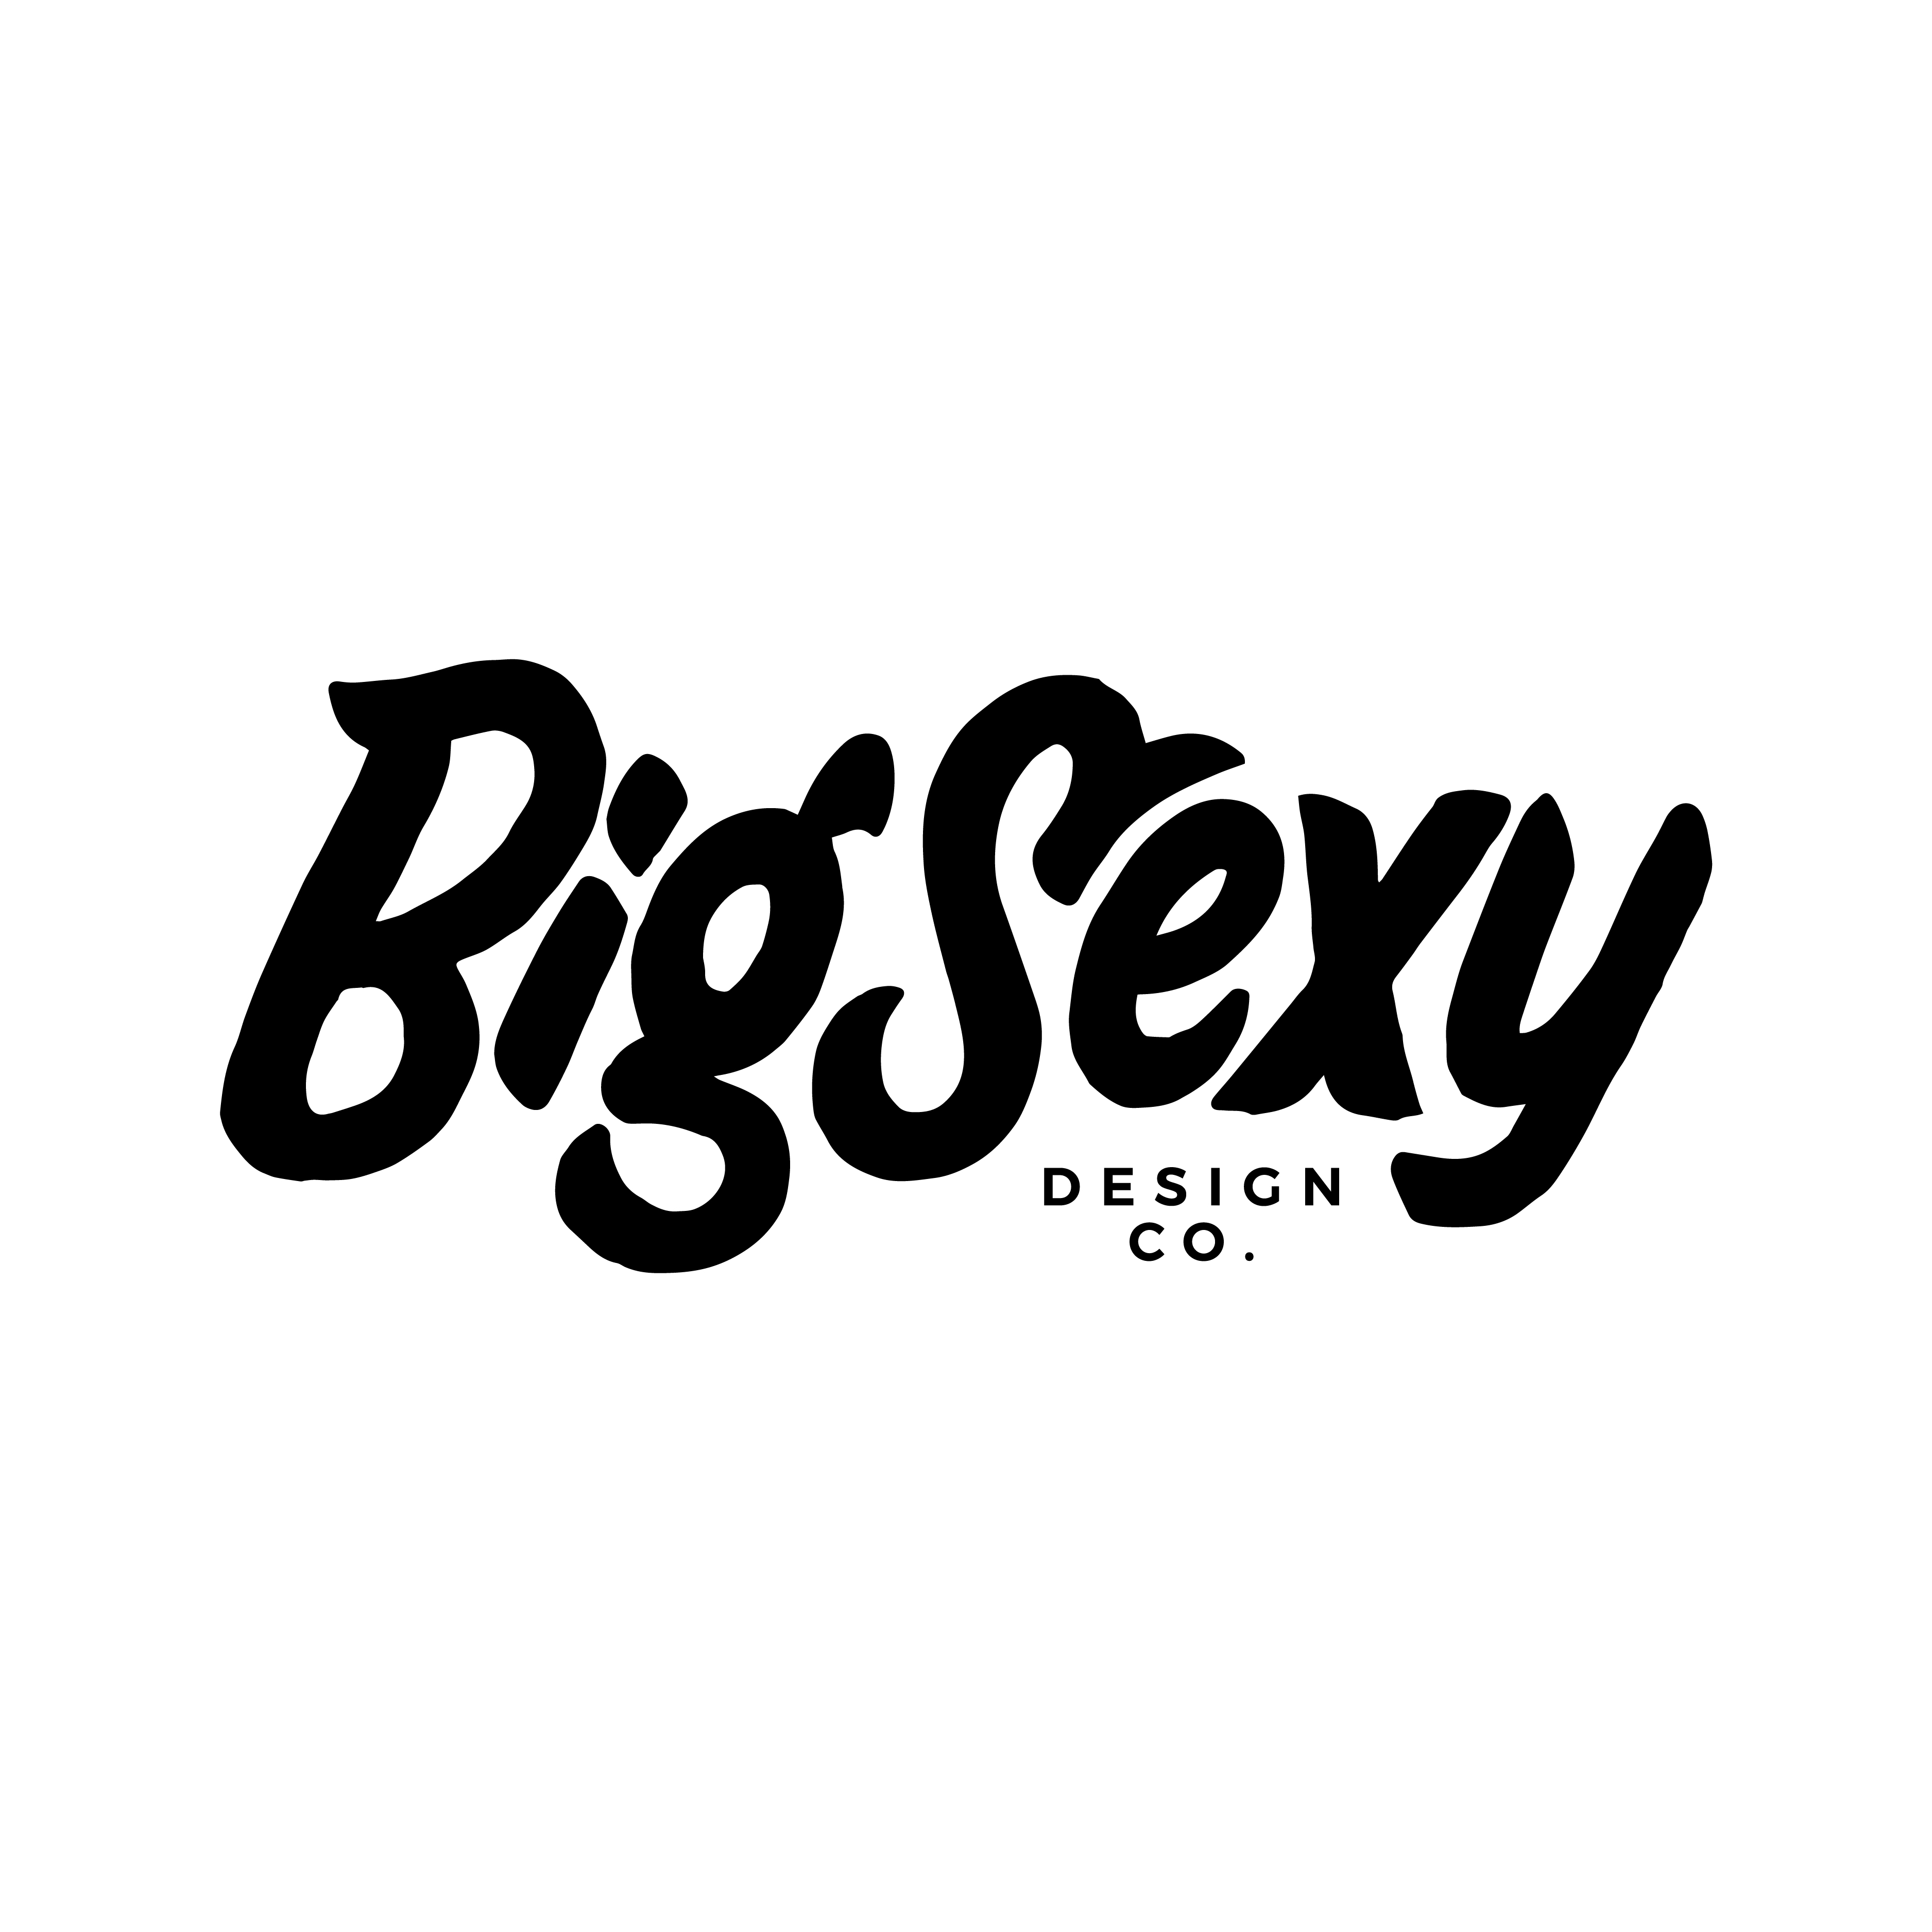 Big Sexy Design Co. logo design by logo designer PAX STUDIO for your inspiration and for the worlds largest logo competition